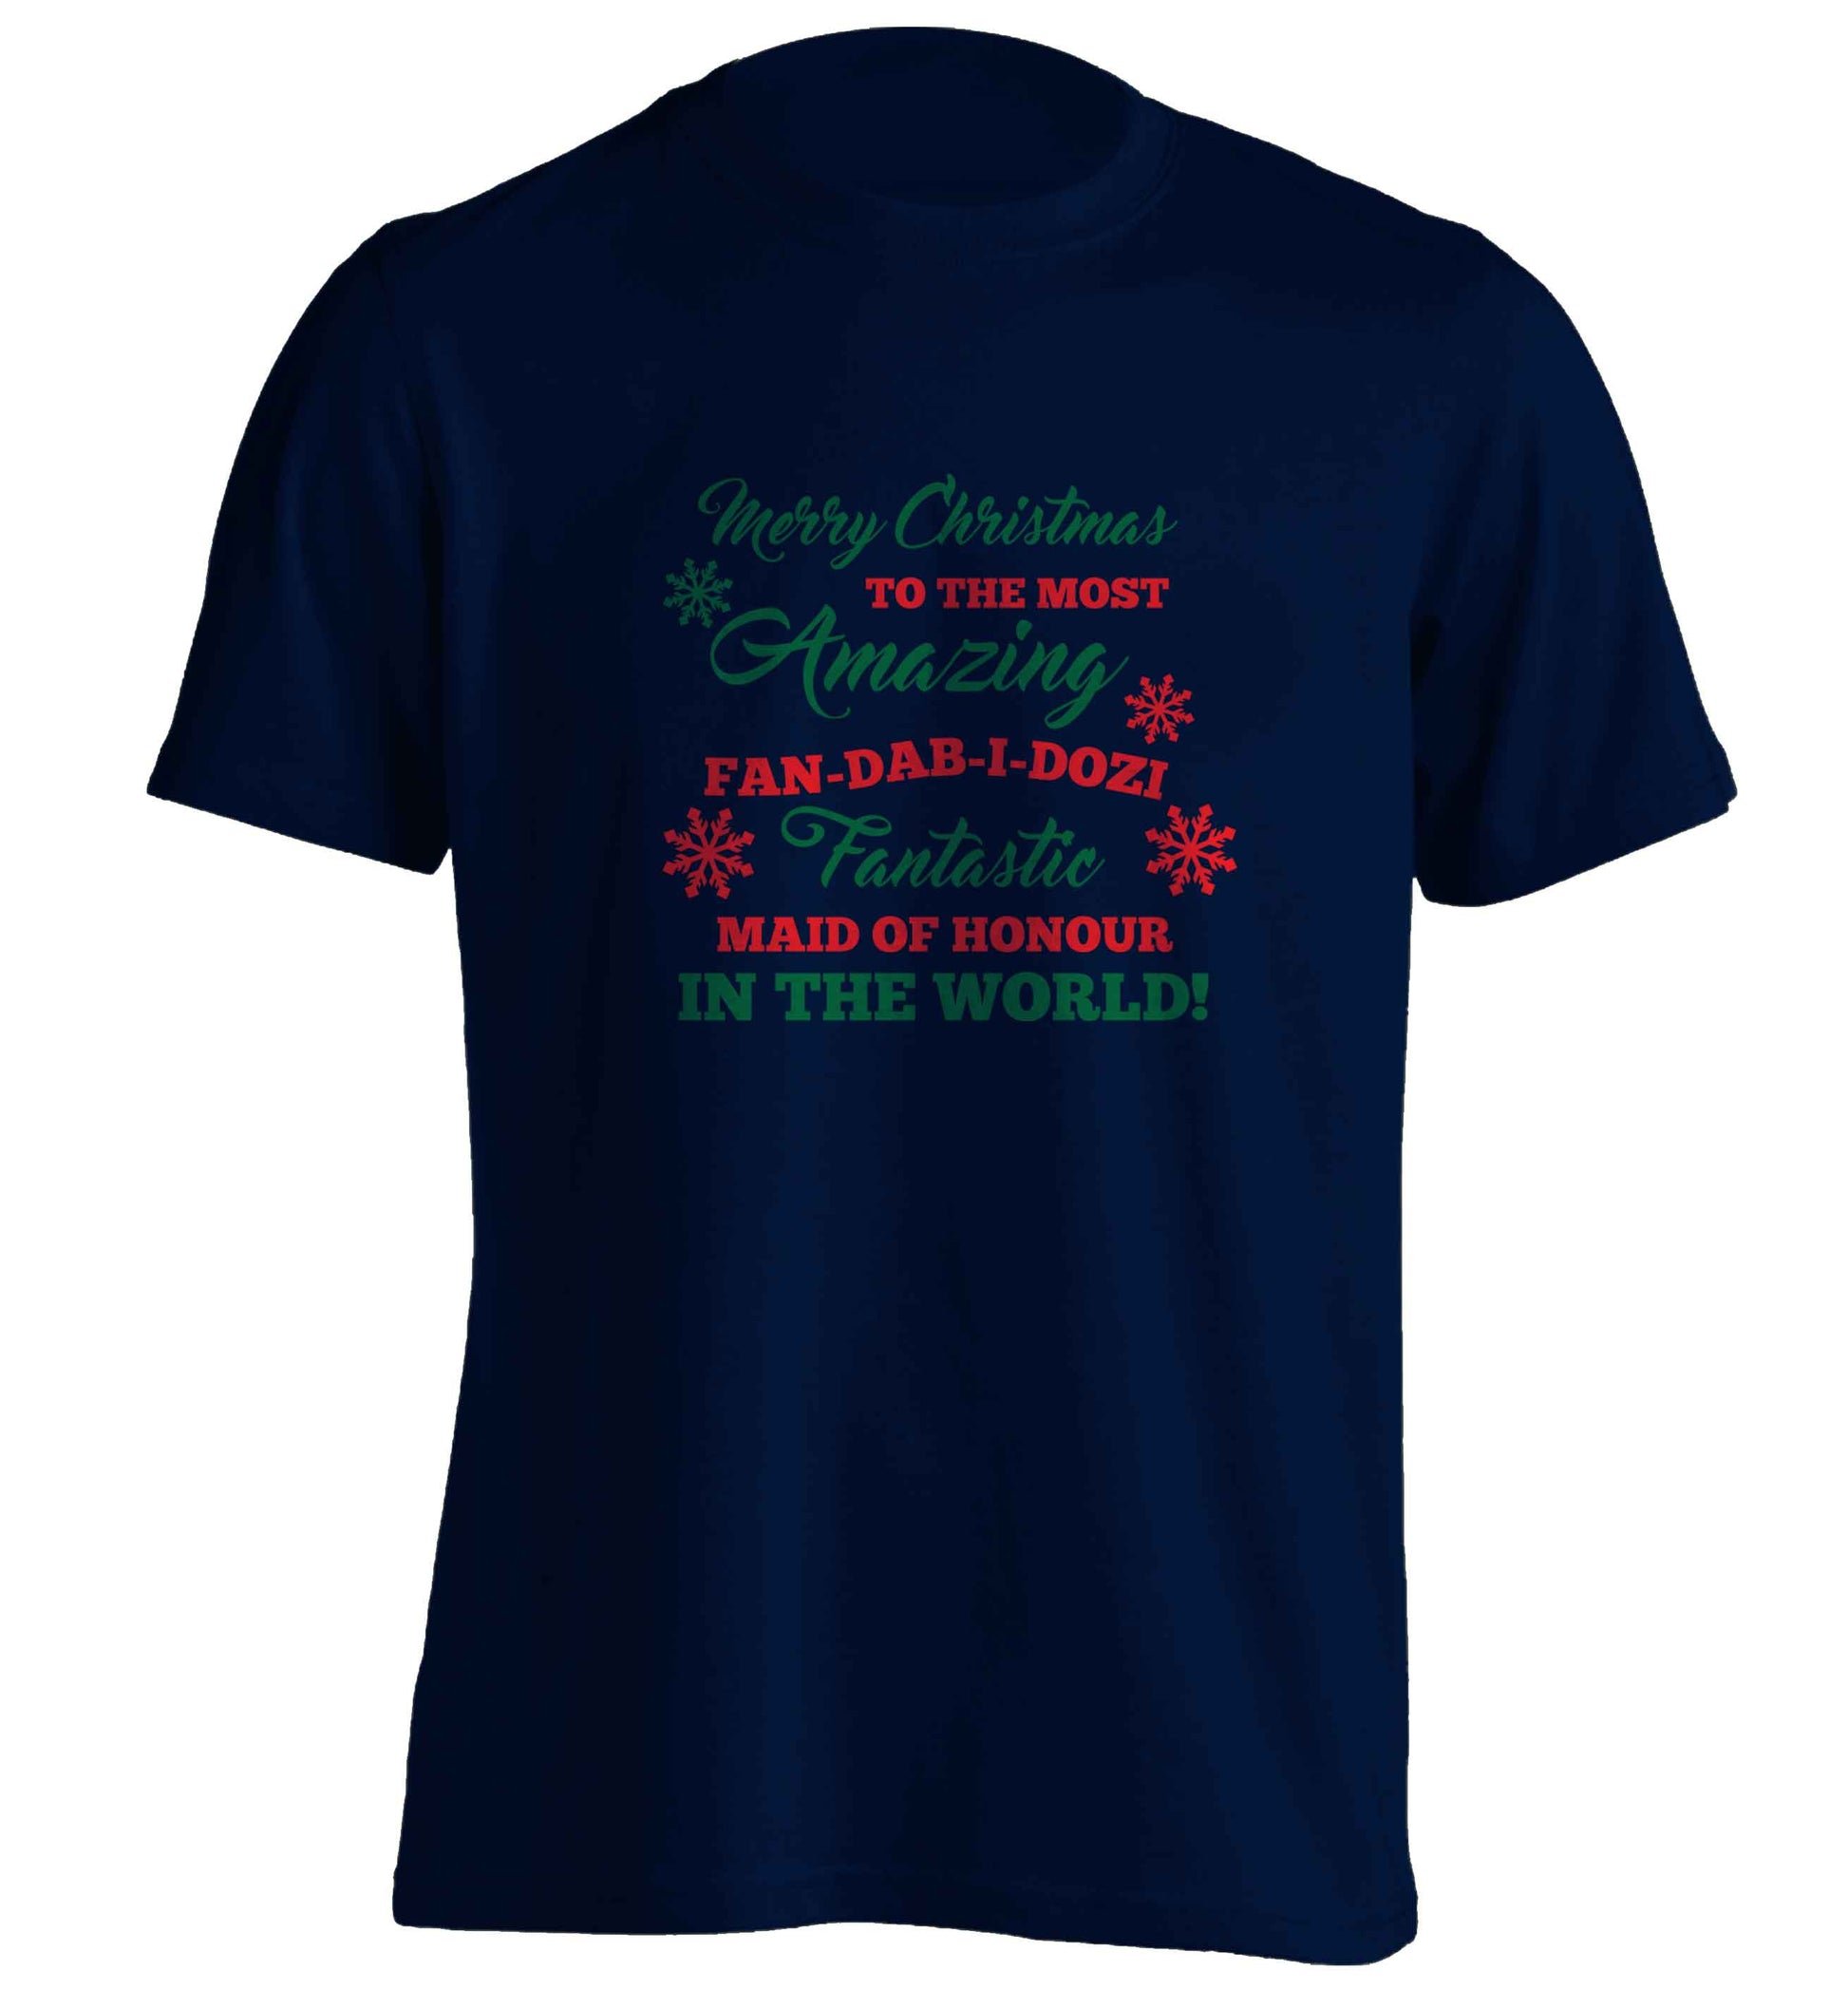 Merry Christmas to the most amazing maid of honour in the world! adults unisex navy Tshirt 2XL